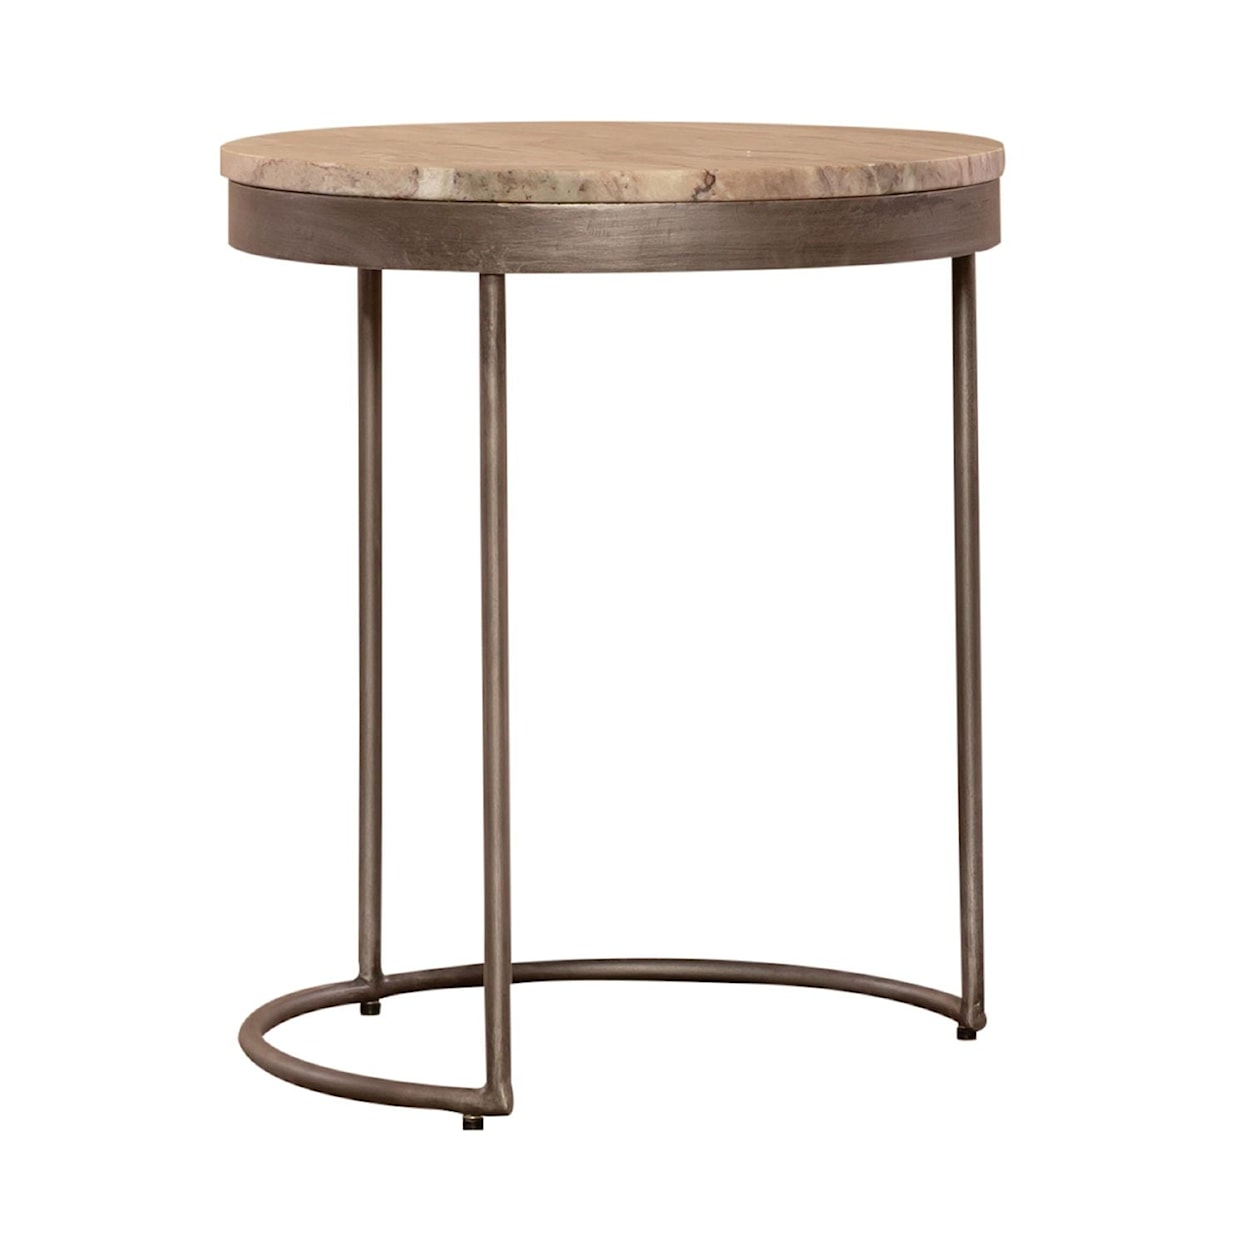 Libby Eclipse Nesting Tables